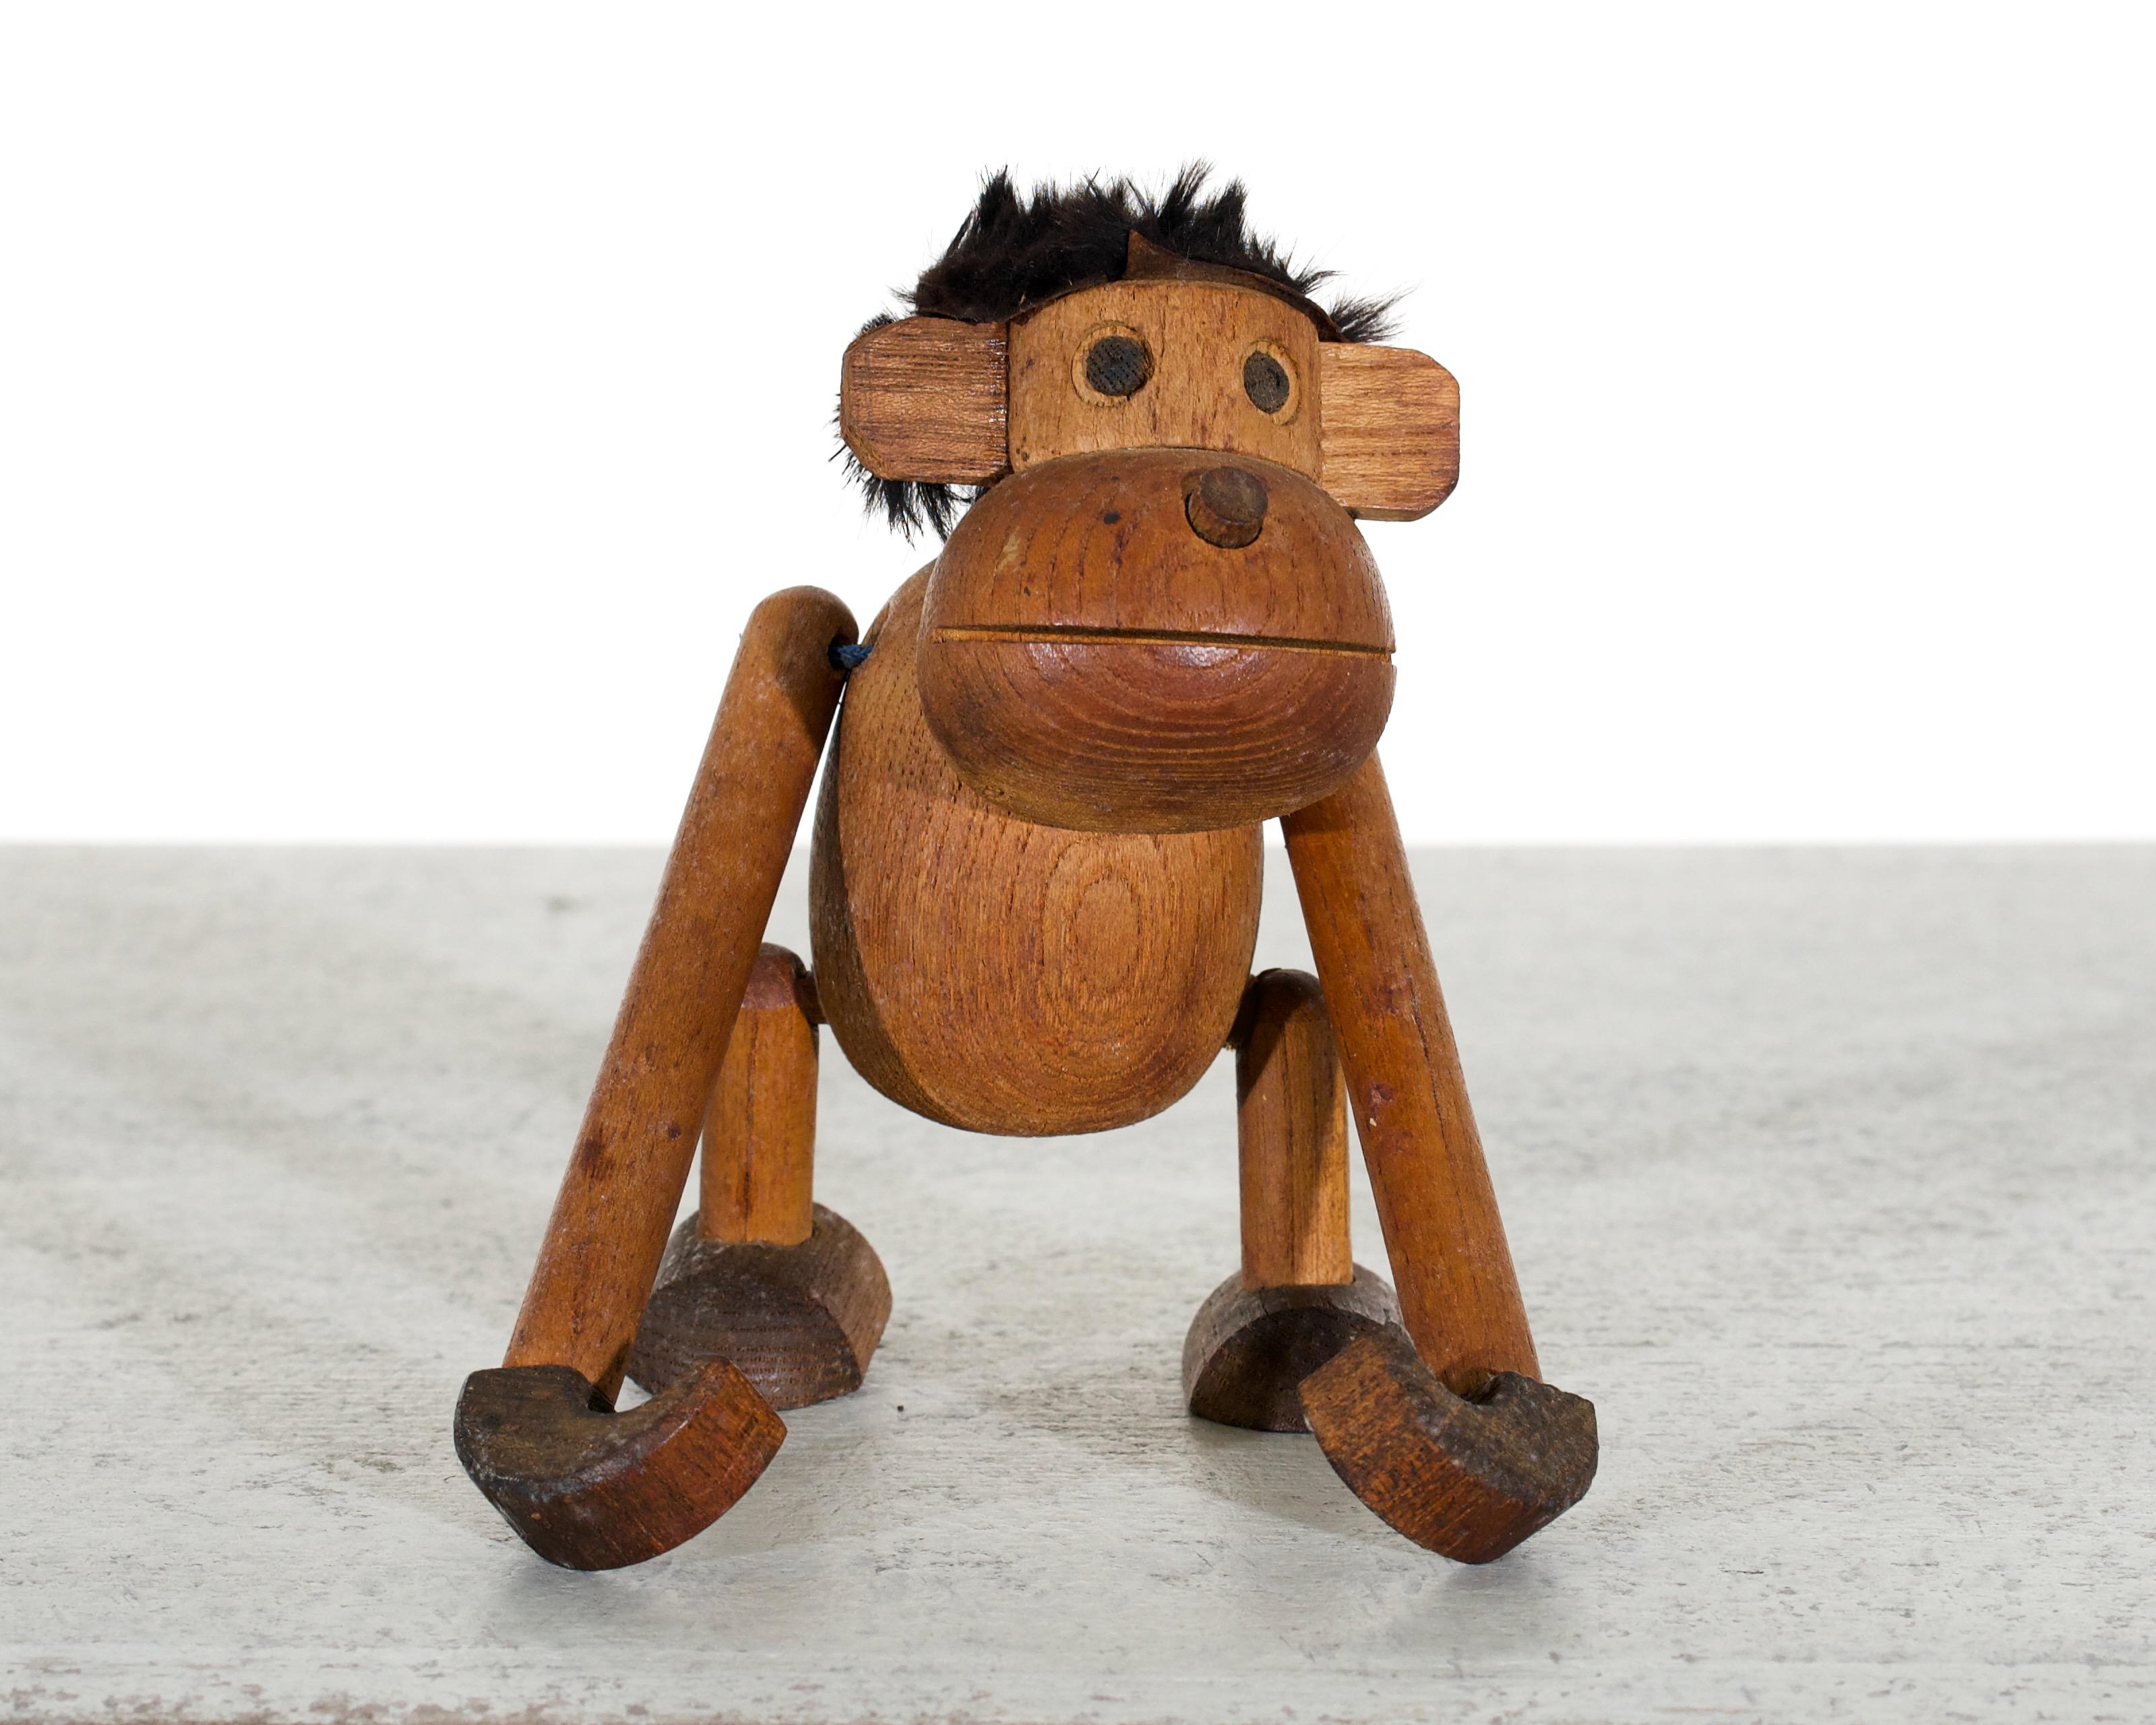 This is a very fine wooden carved monkey. It is likely an early work by renowned Danish designer, Kay Bojesen. It was probably created in the 1950s.